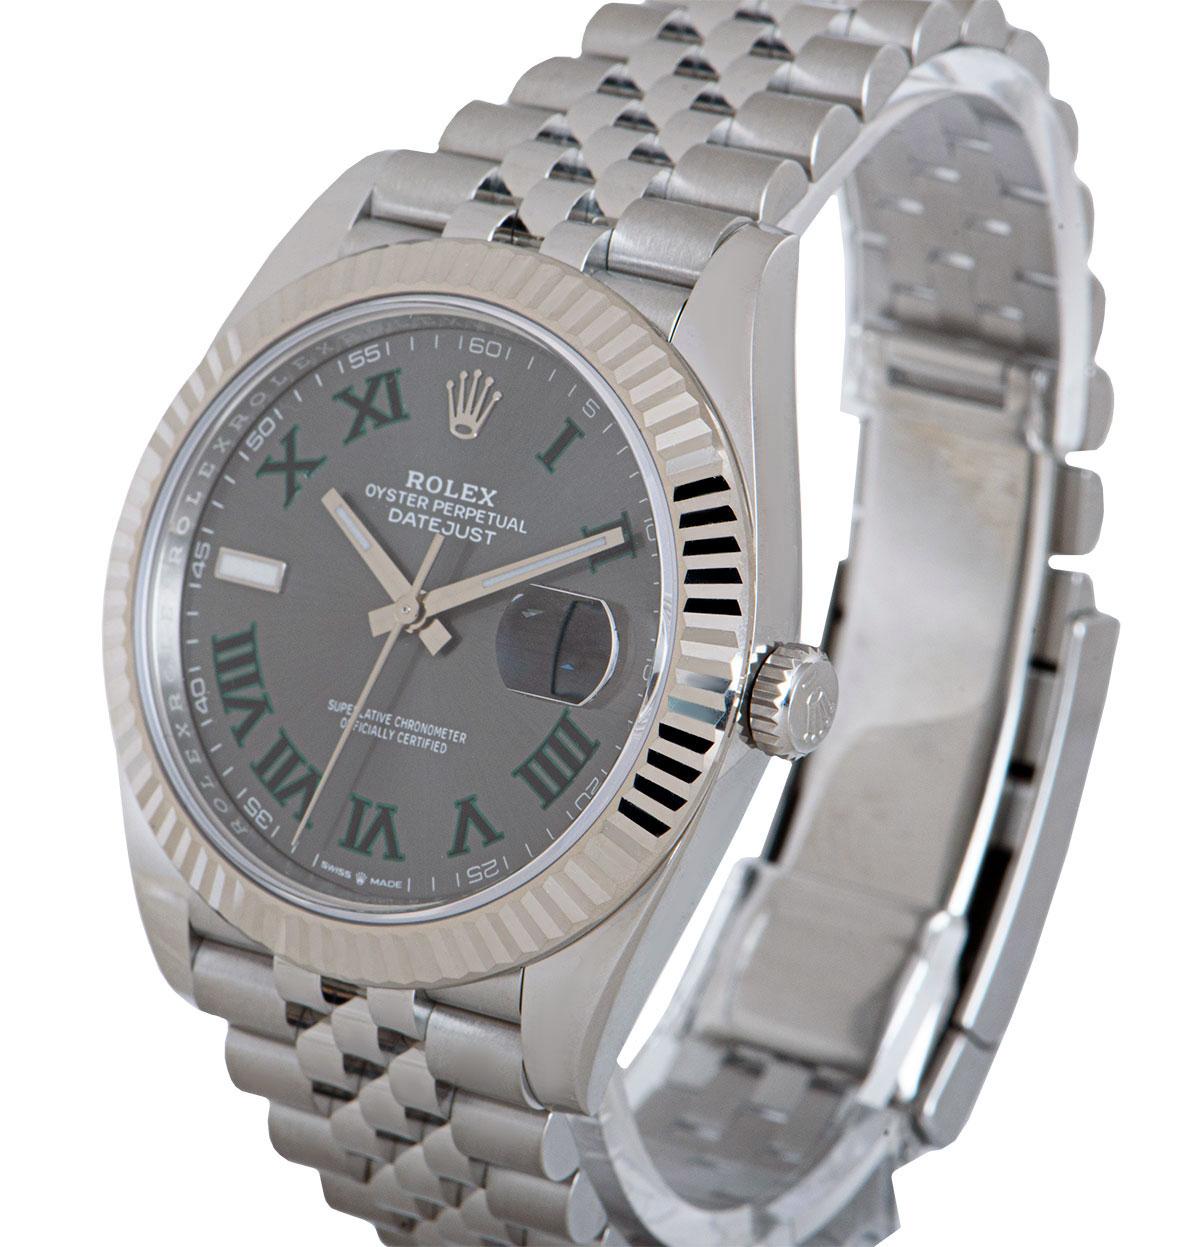 A 41 mm Unworn Stainless Steel Oyster Perpetual Datejust 41 Gents Wristwatch, slate grey dial with applied roman numerals, date at 3 0'clock, a fixed 18k white gold fluted bezel, a stainless steel jubilee bracelet with a stainless steel deployant